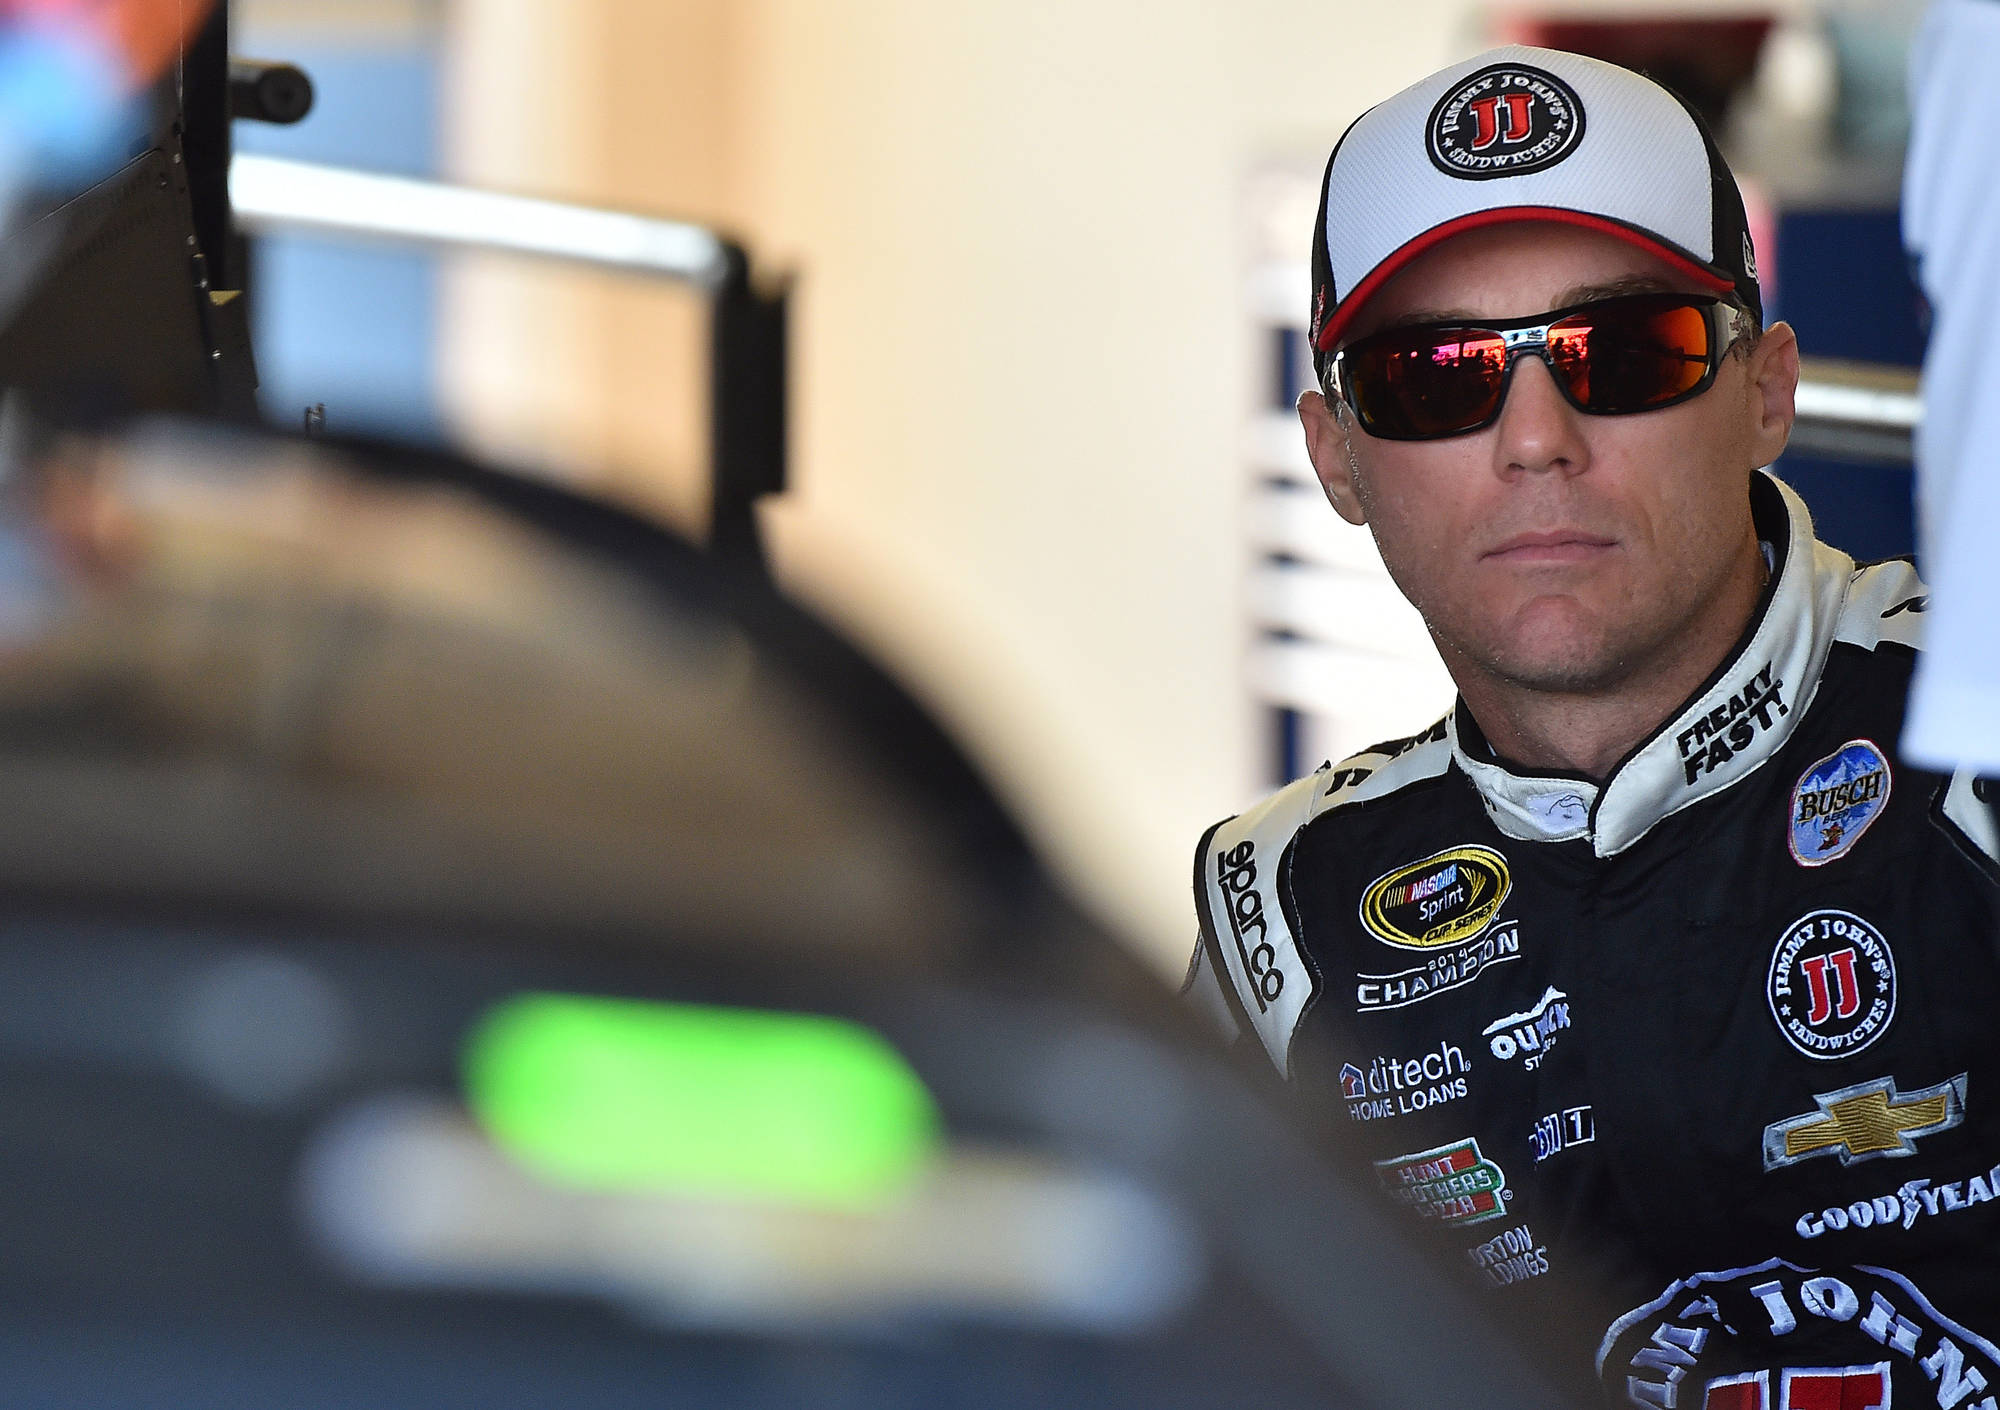 The Hendrick-Harvick Myth - "Just A Bunch Of People Who Make S*** Up"